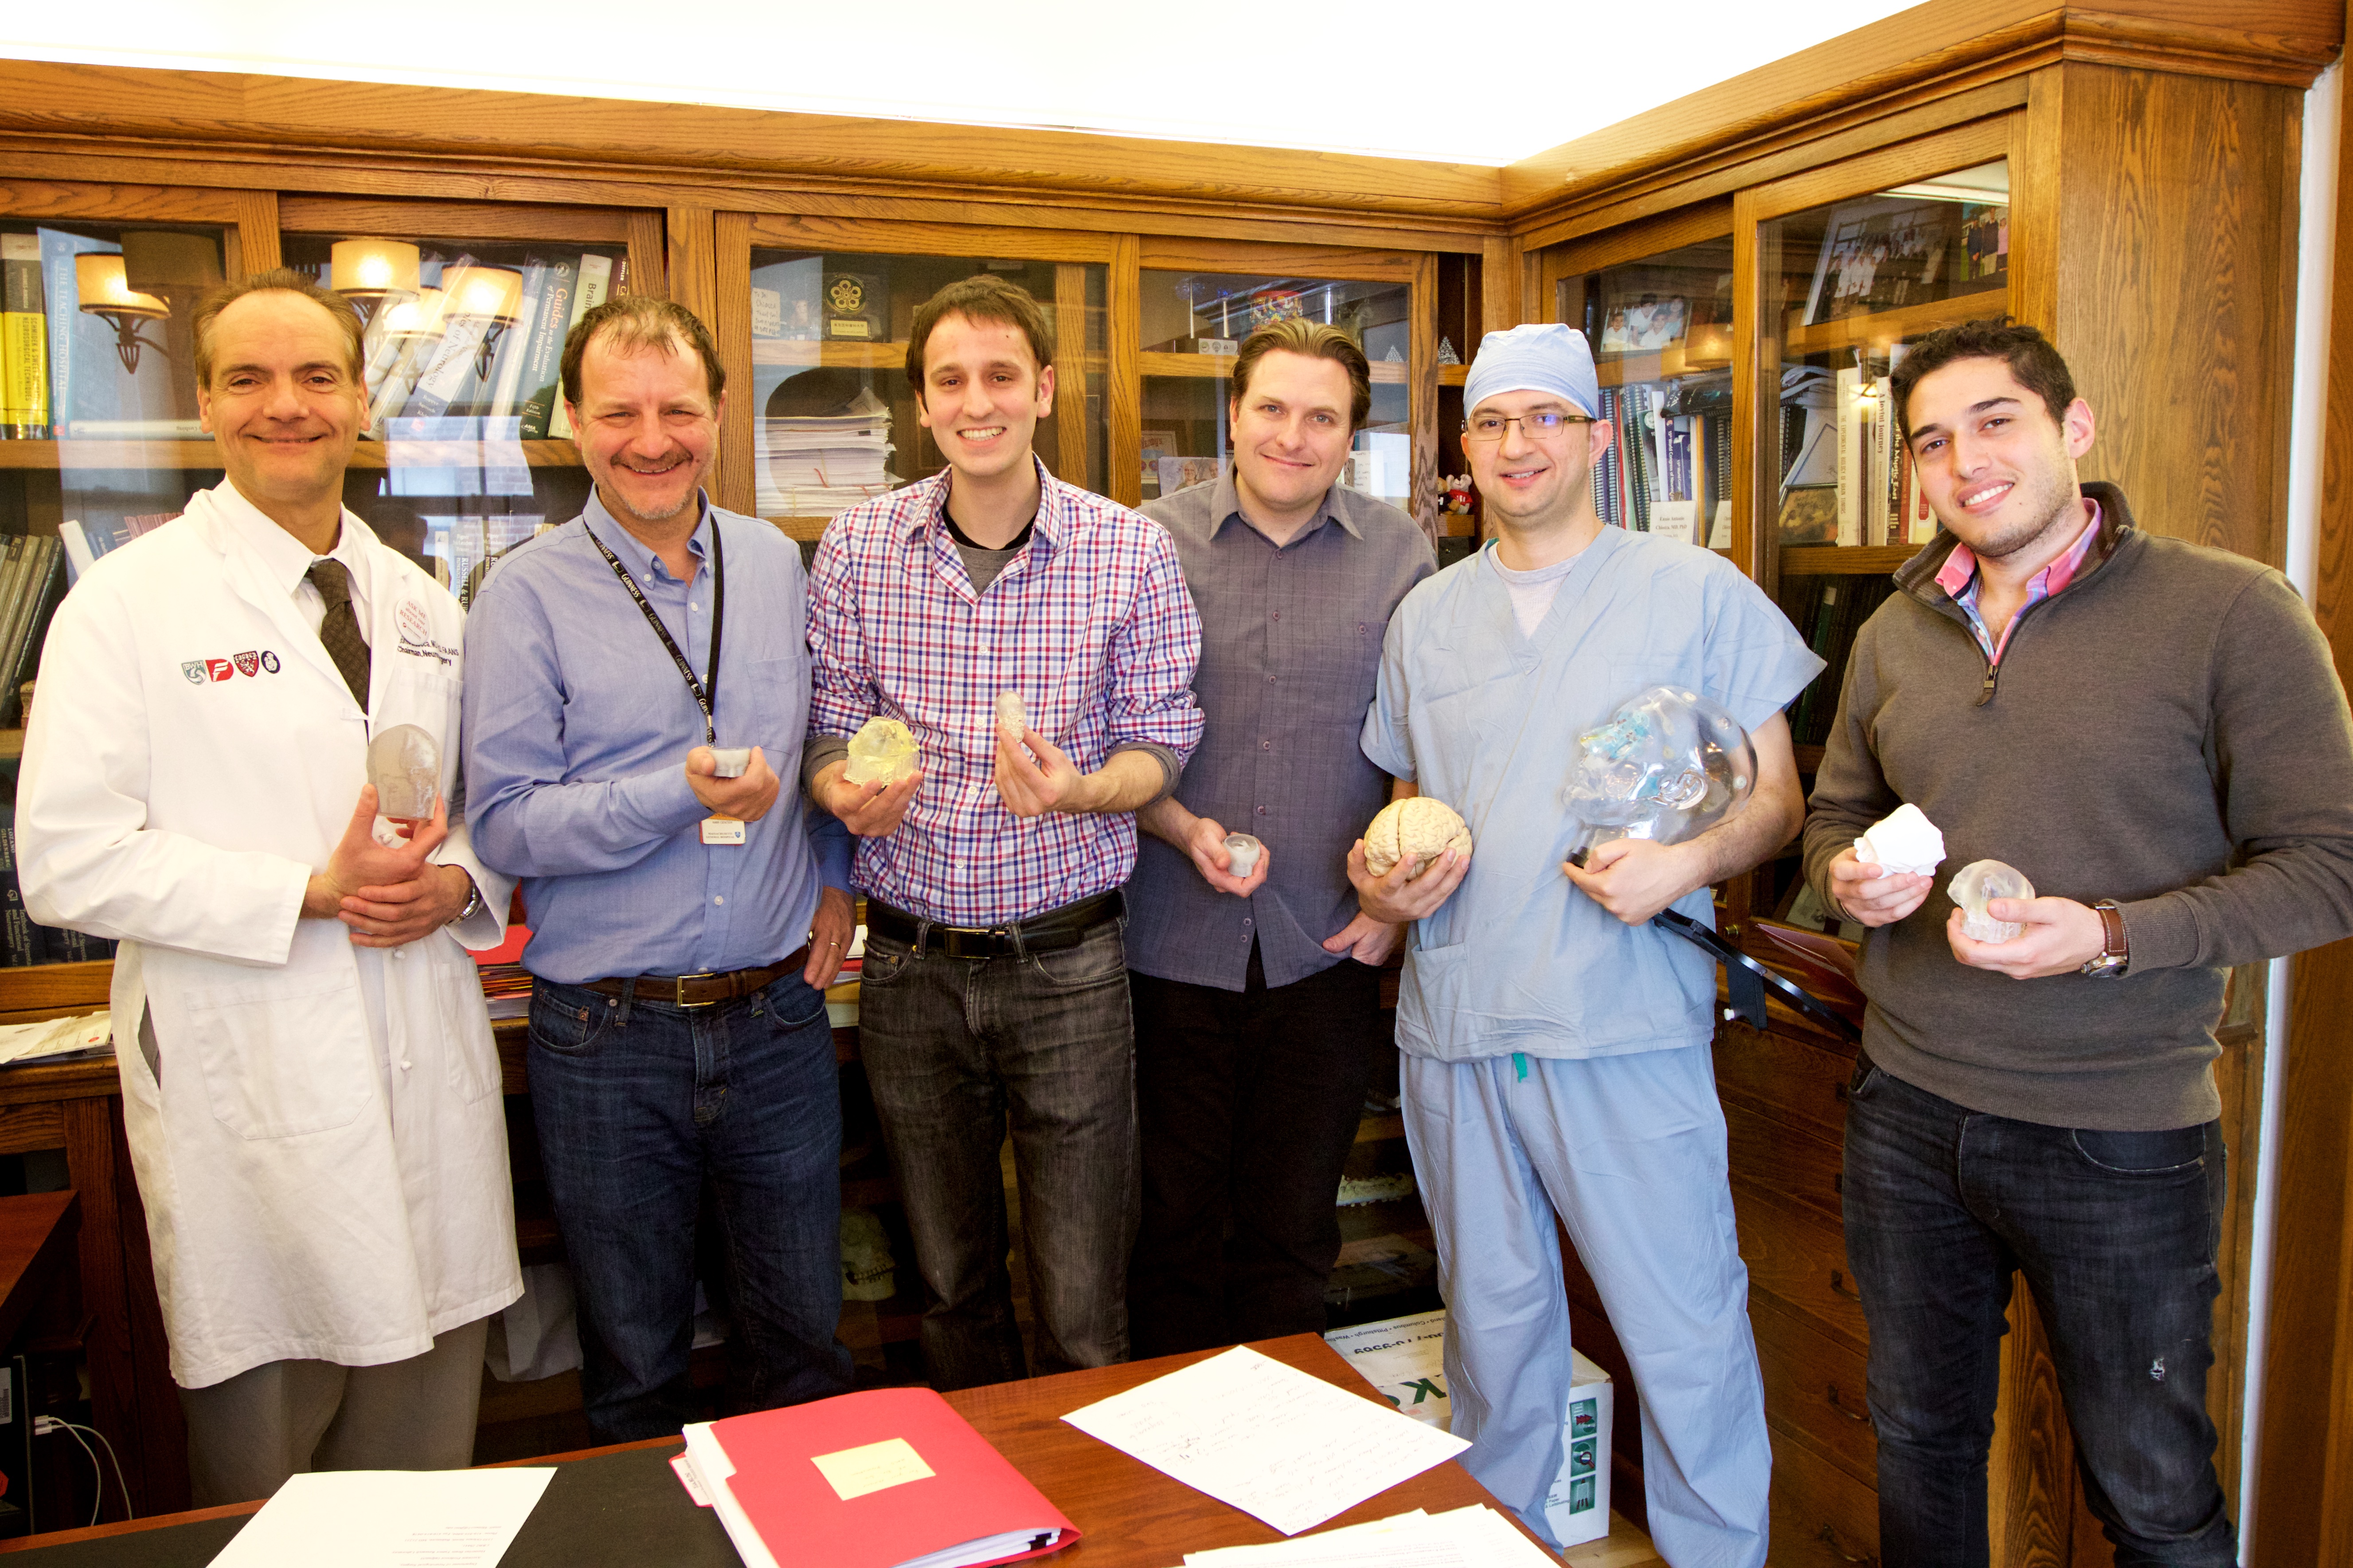 The team working on multimaterial biomedical 3-D printing, taken in Antonio Chiocca's office. From left: Chiocca, Steve Pieper, Steven Keating, James Weaver, of the Wyss Institute for Biologically Inspired Engineering at Harvard University, Mohamad Abolfotoh and Ahmed Hosny. 